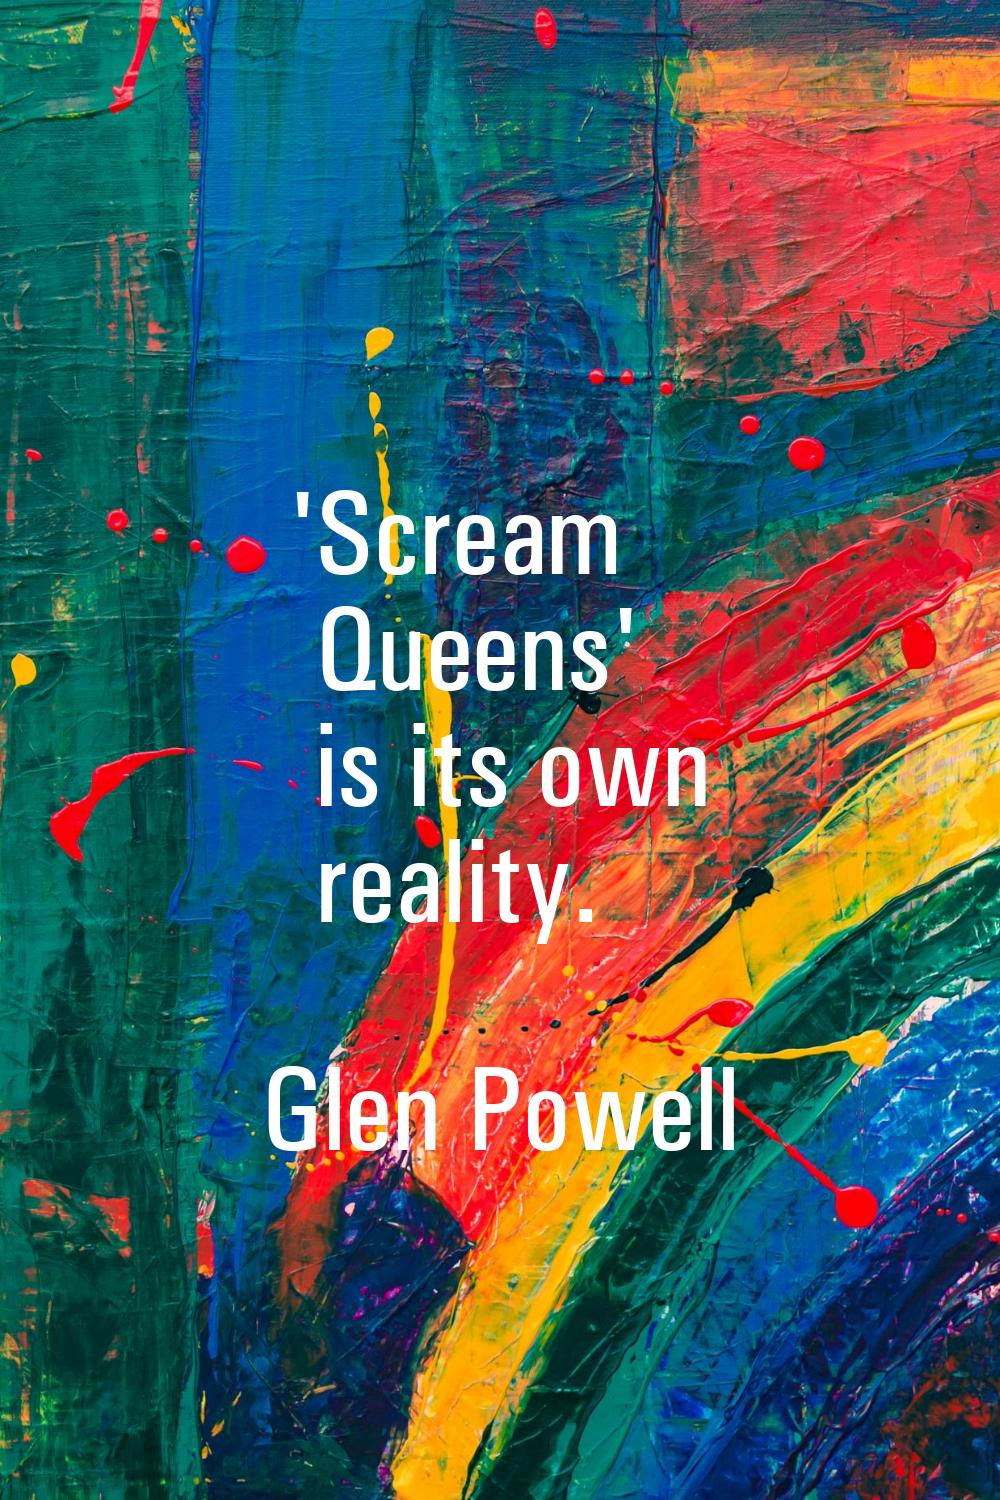 'Scream Queens' is its own reality.